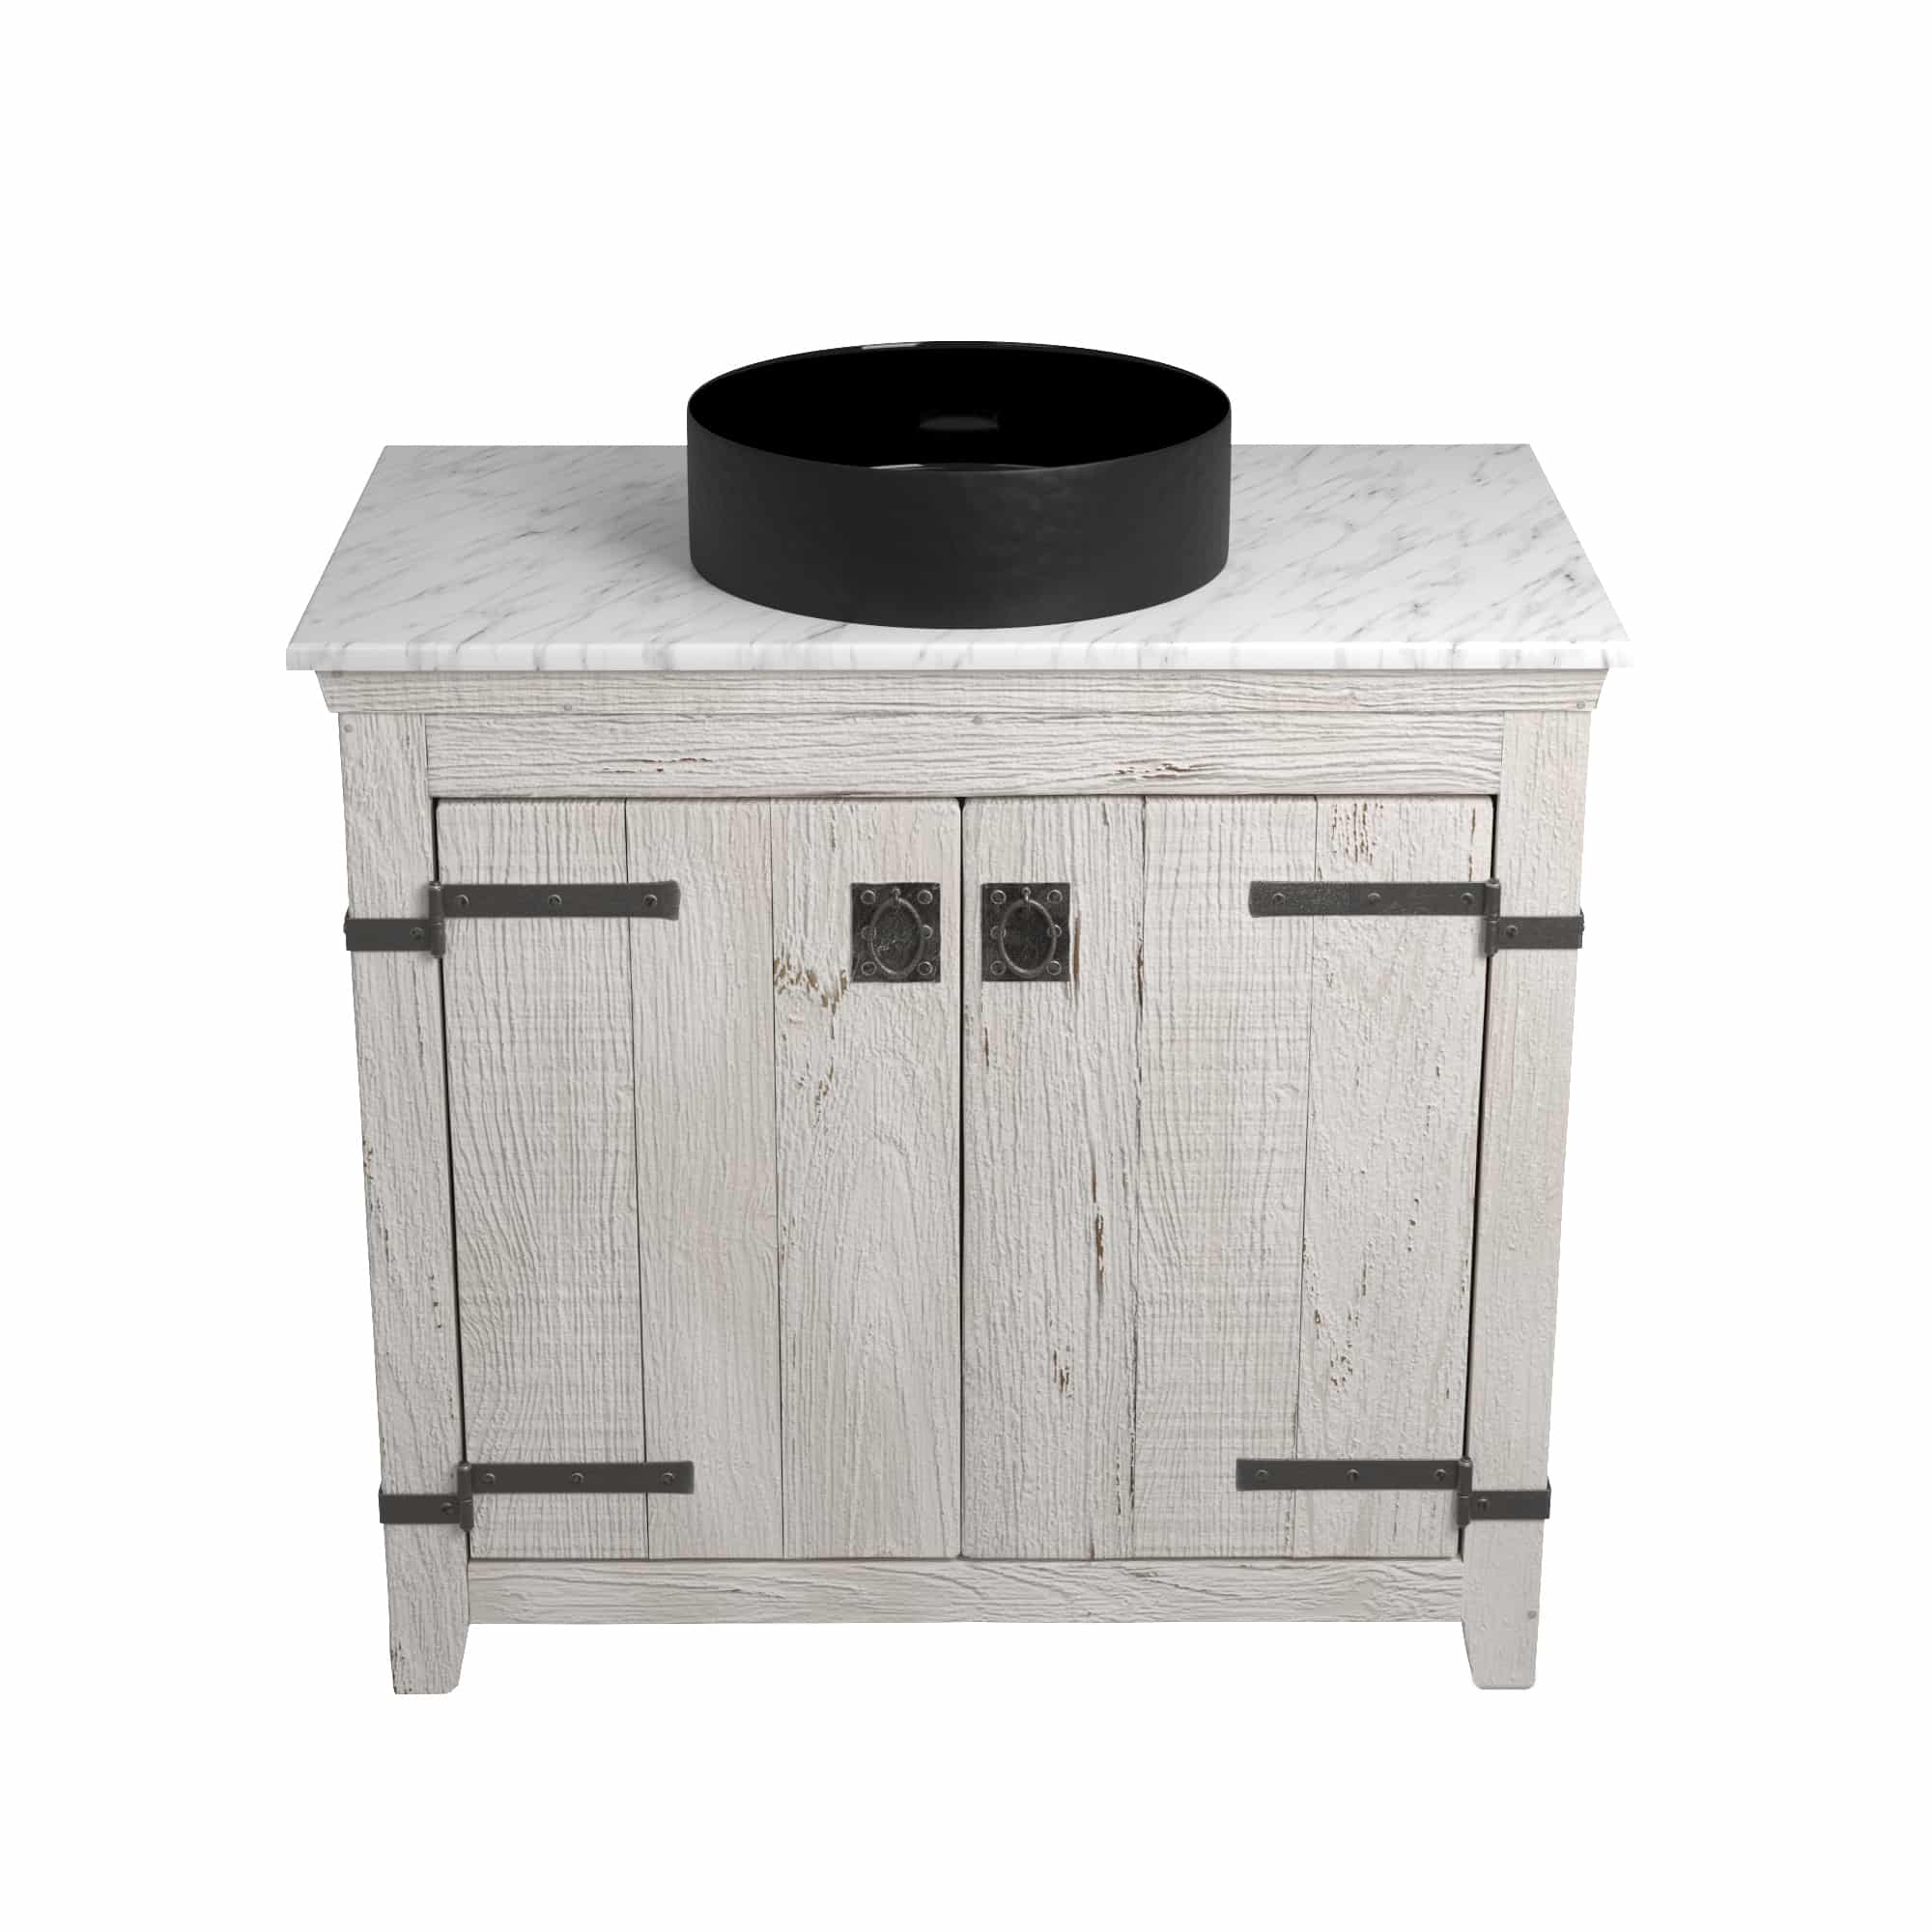 Native Trails 36" Americana Vanity in Whitewash with Carrara Marble Top and Positano in Abyss, Single Faucet Hole, BND36-VB-CT-MG-041